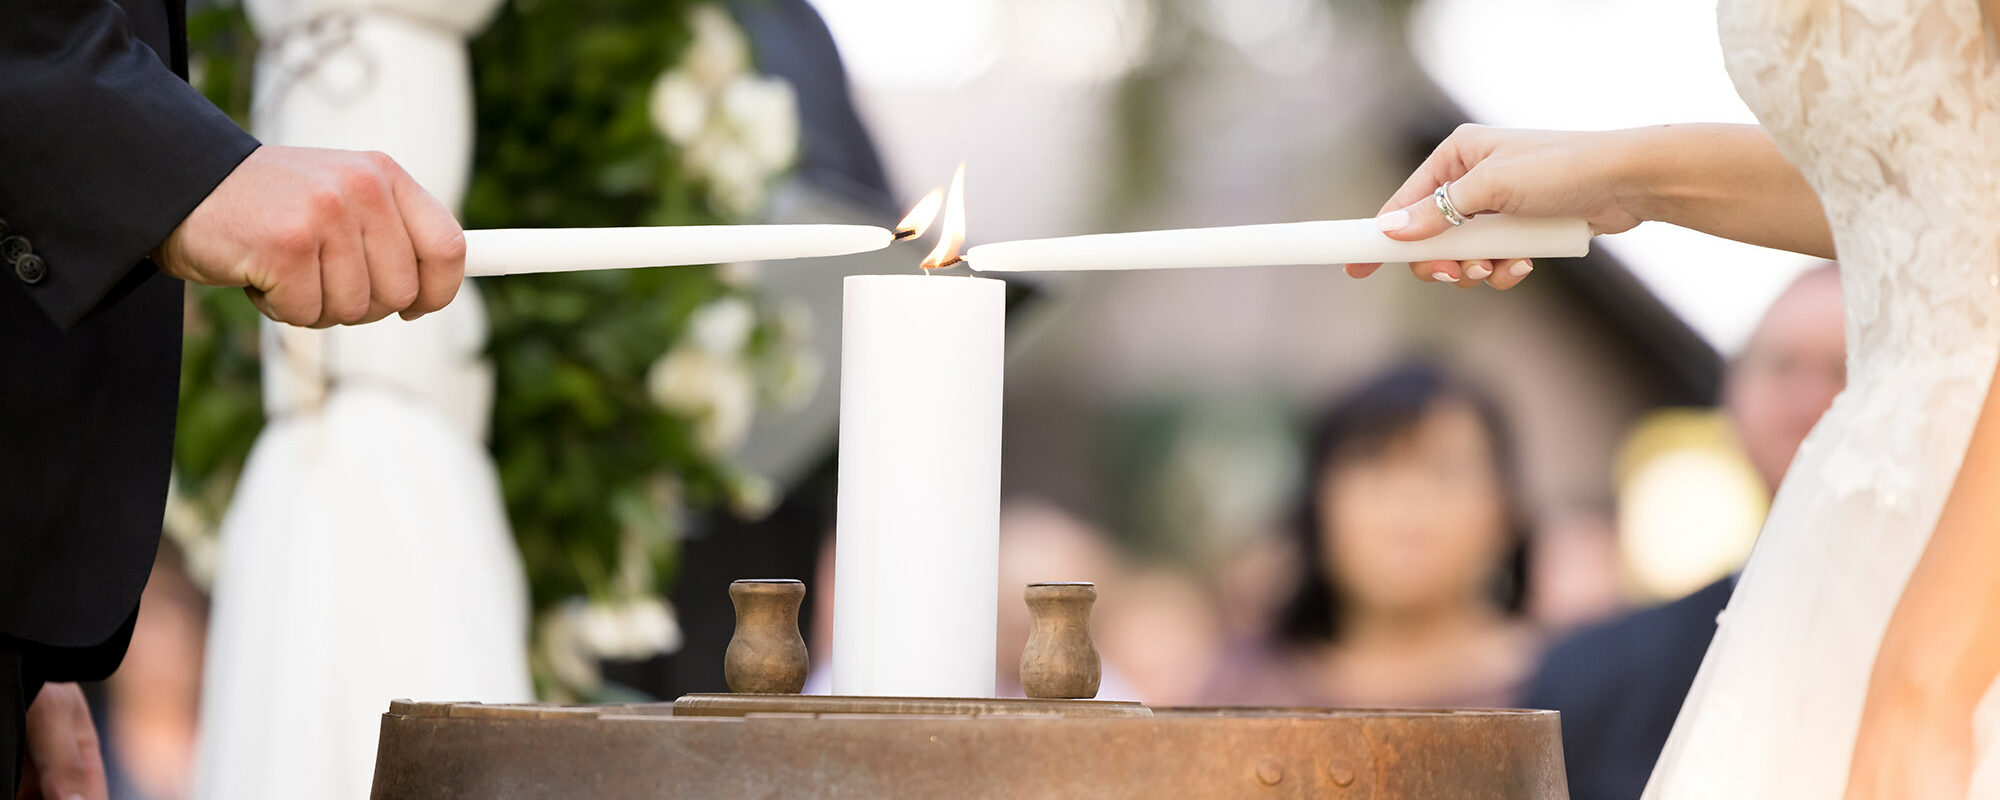 Unity Ceremony – What is it and how do I incorporate it into my big day? featured image